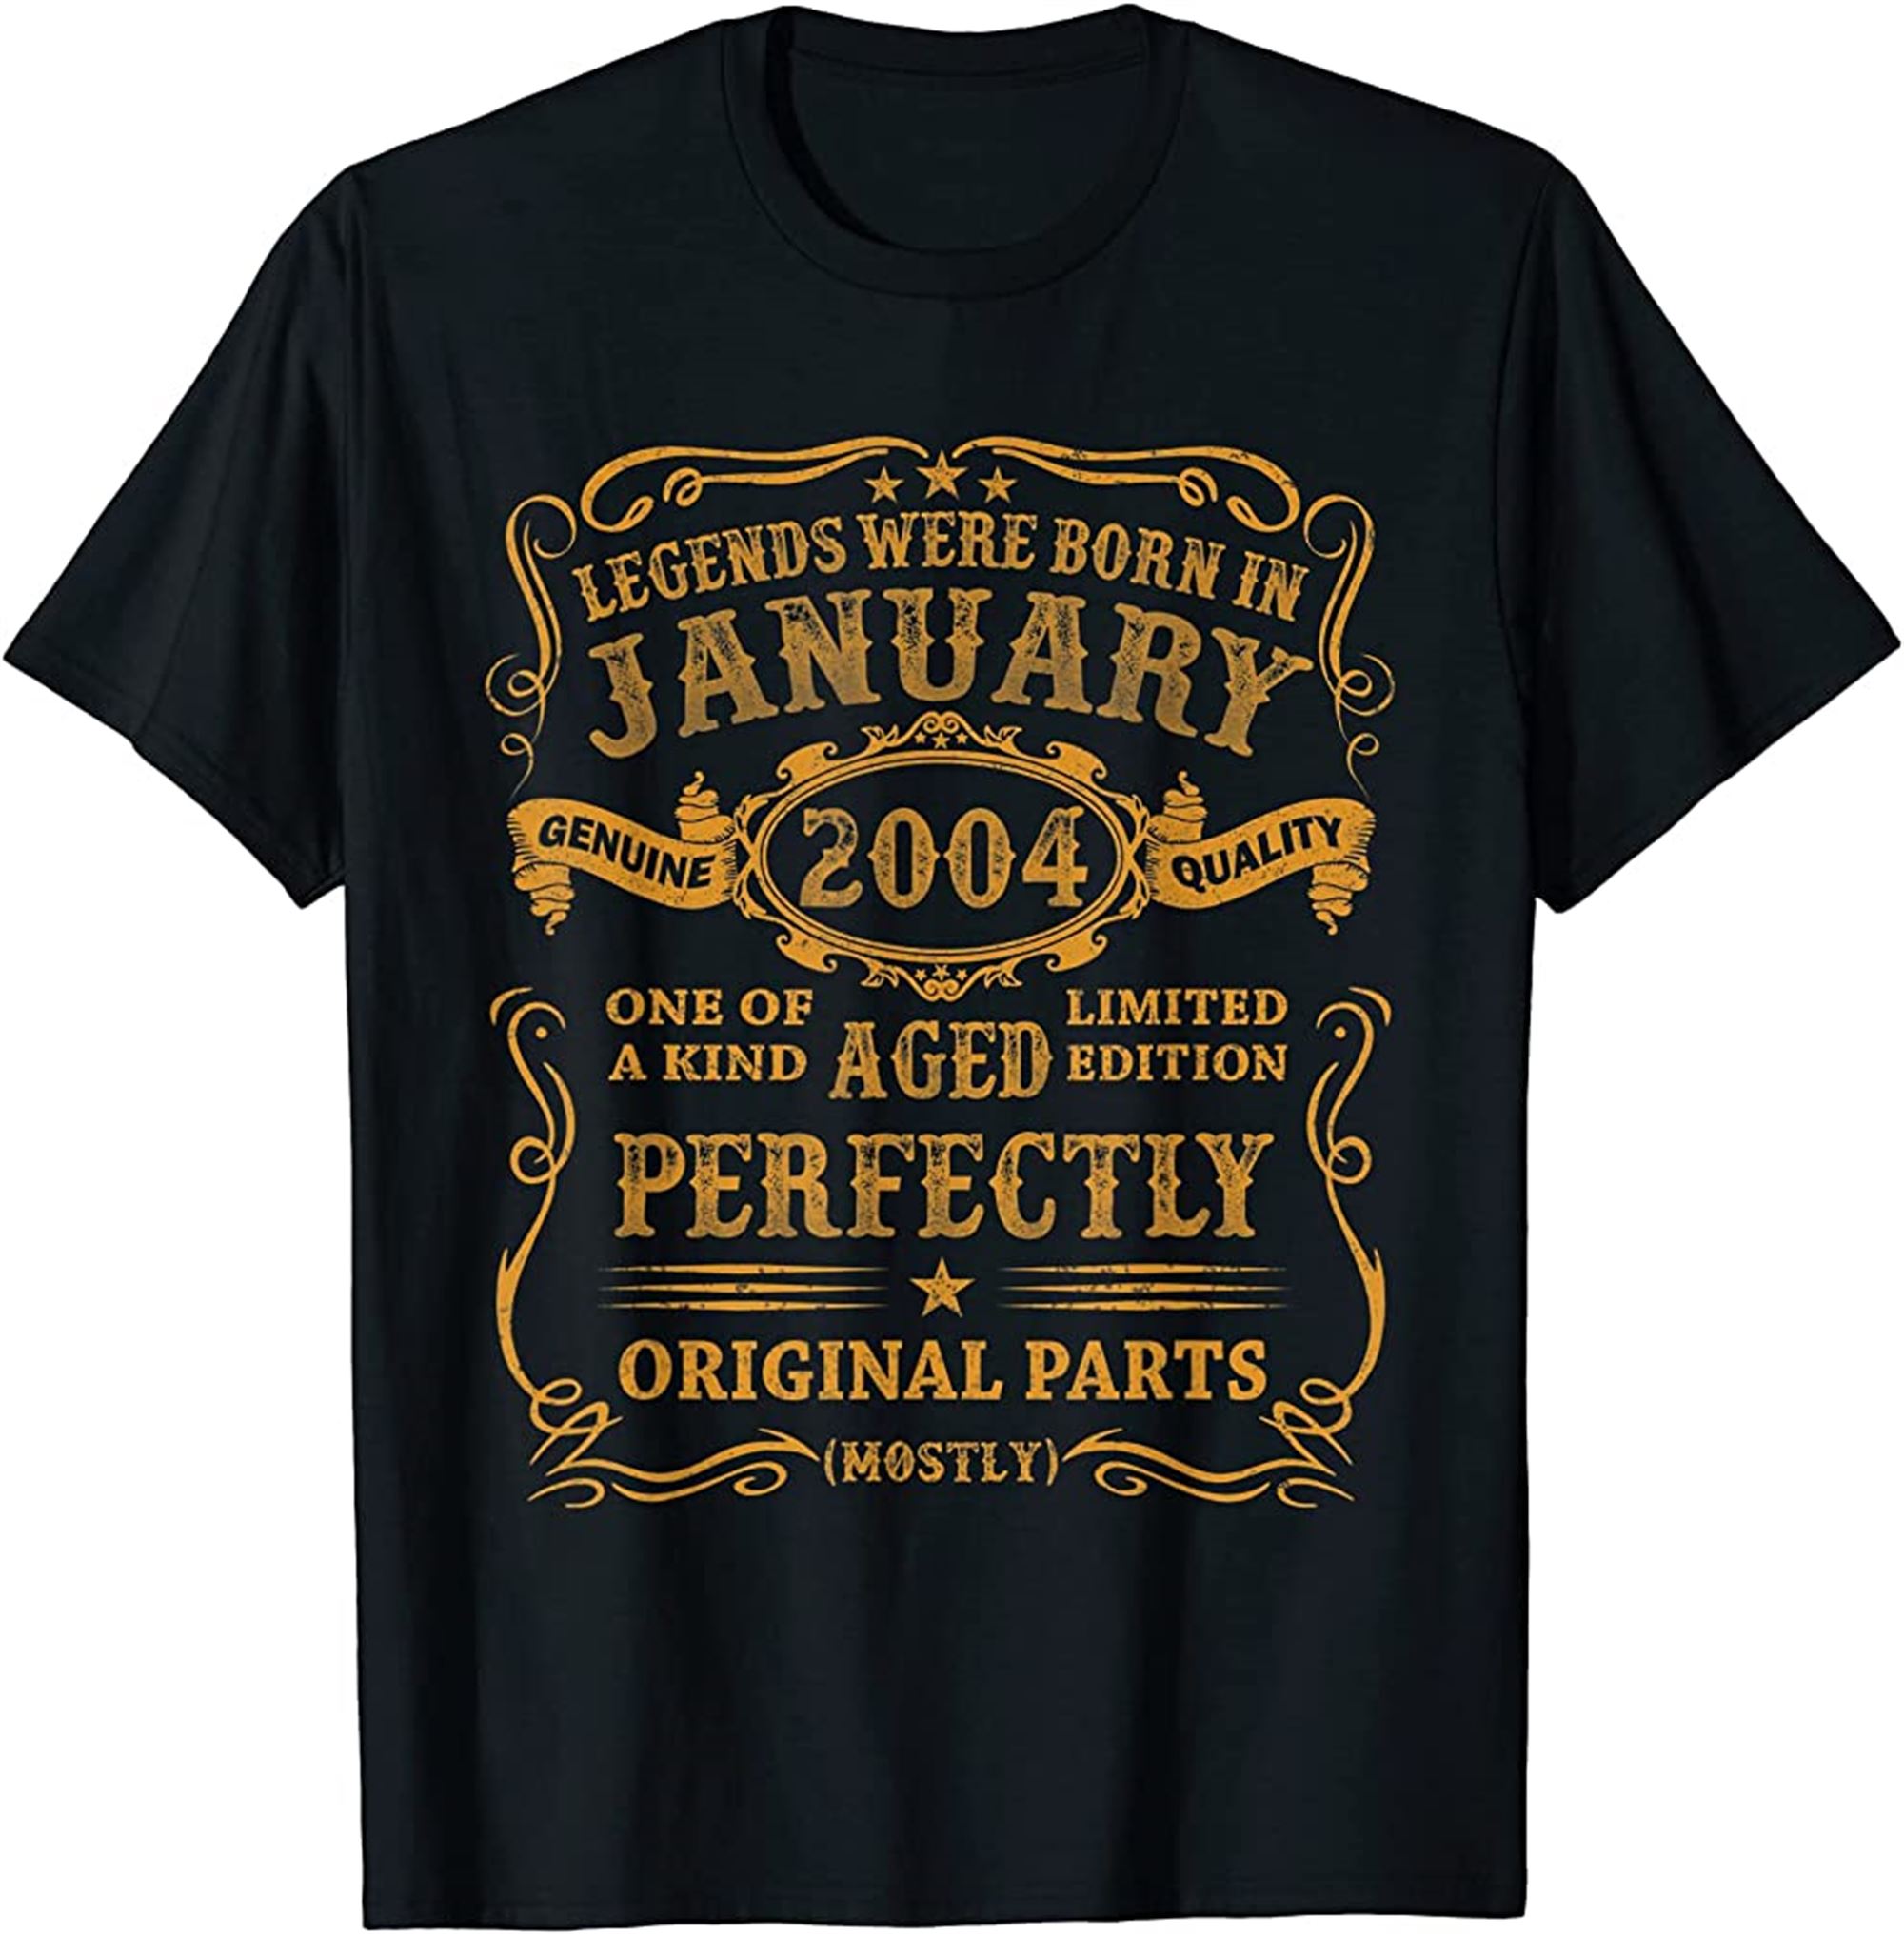 Legends Were Born In January 2004 18 Year Old Birthday Gifts T-shirt Full Size Up To 5xl